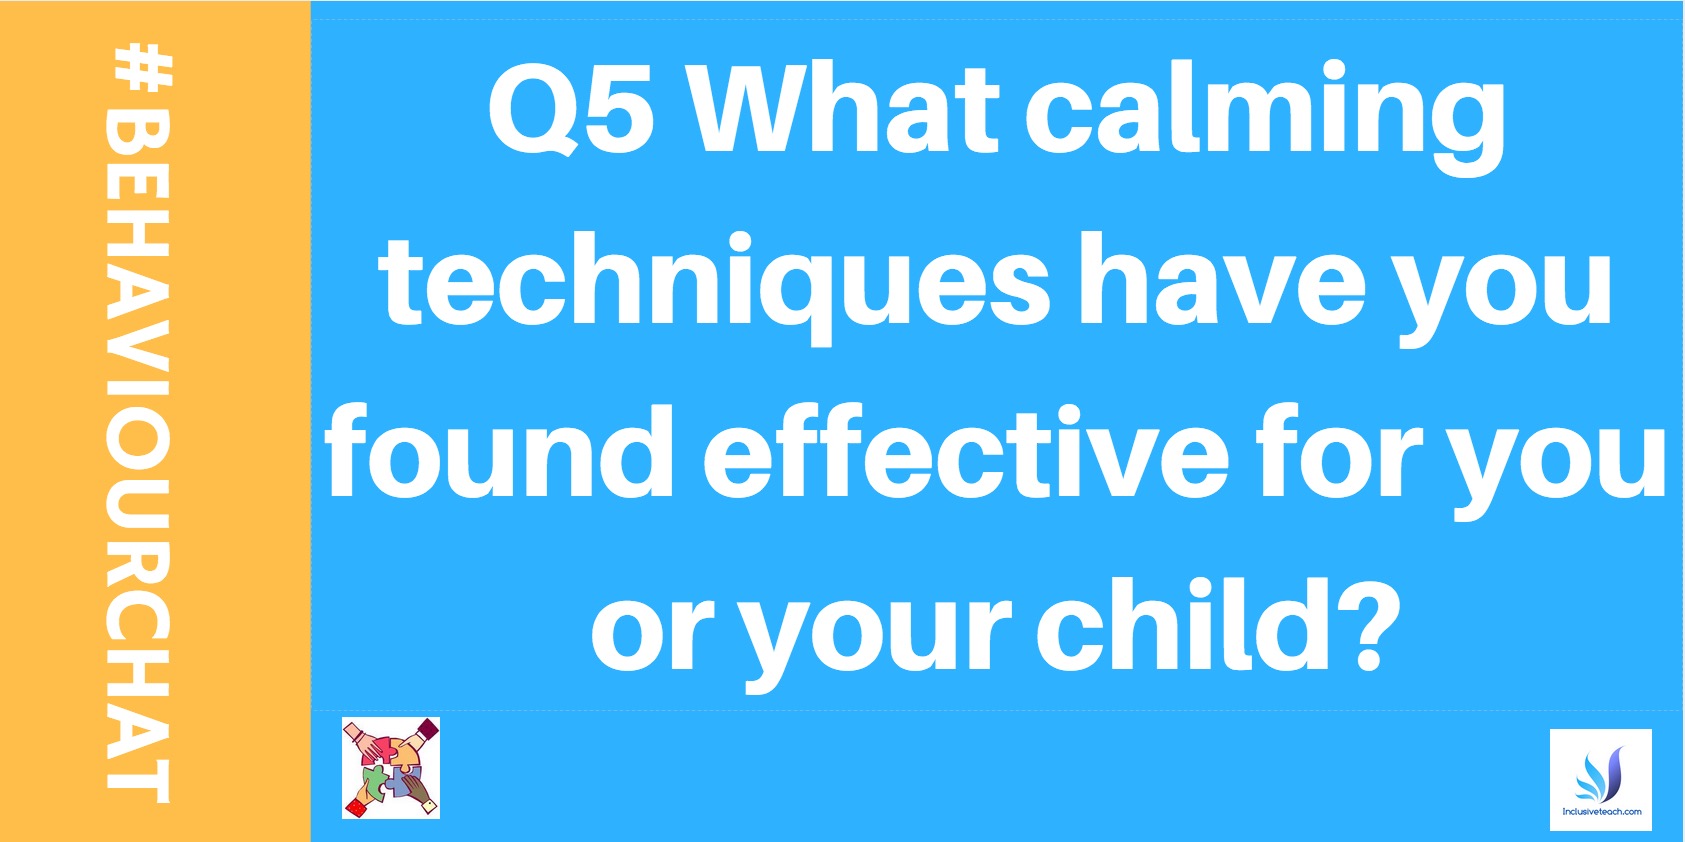 What Calming Techniques Have You Found Effective?